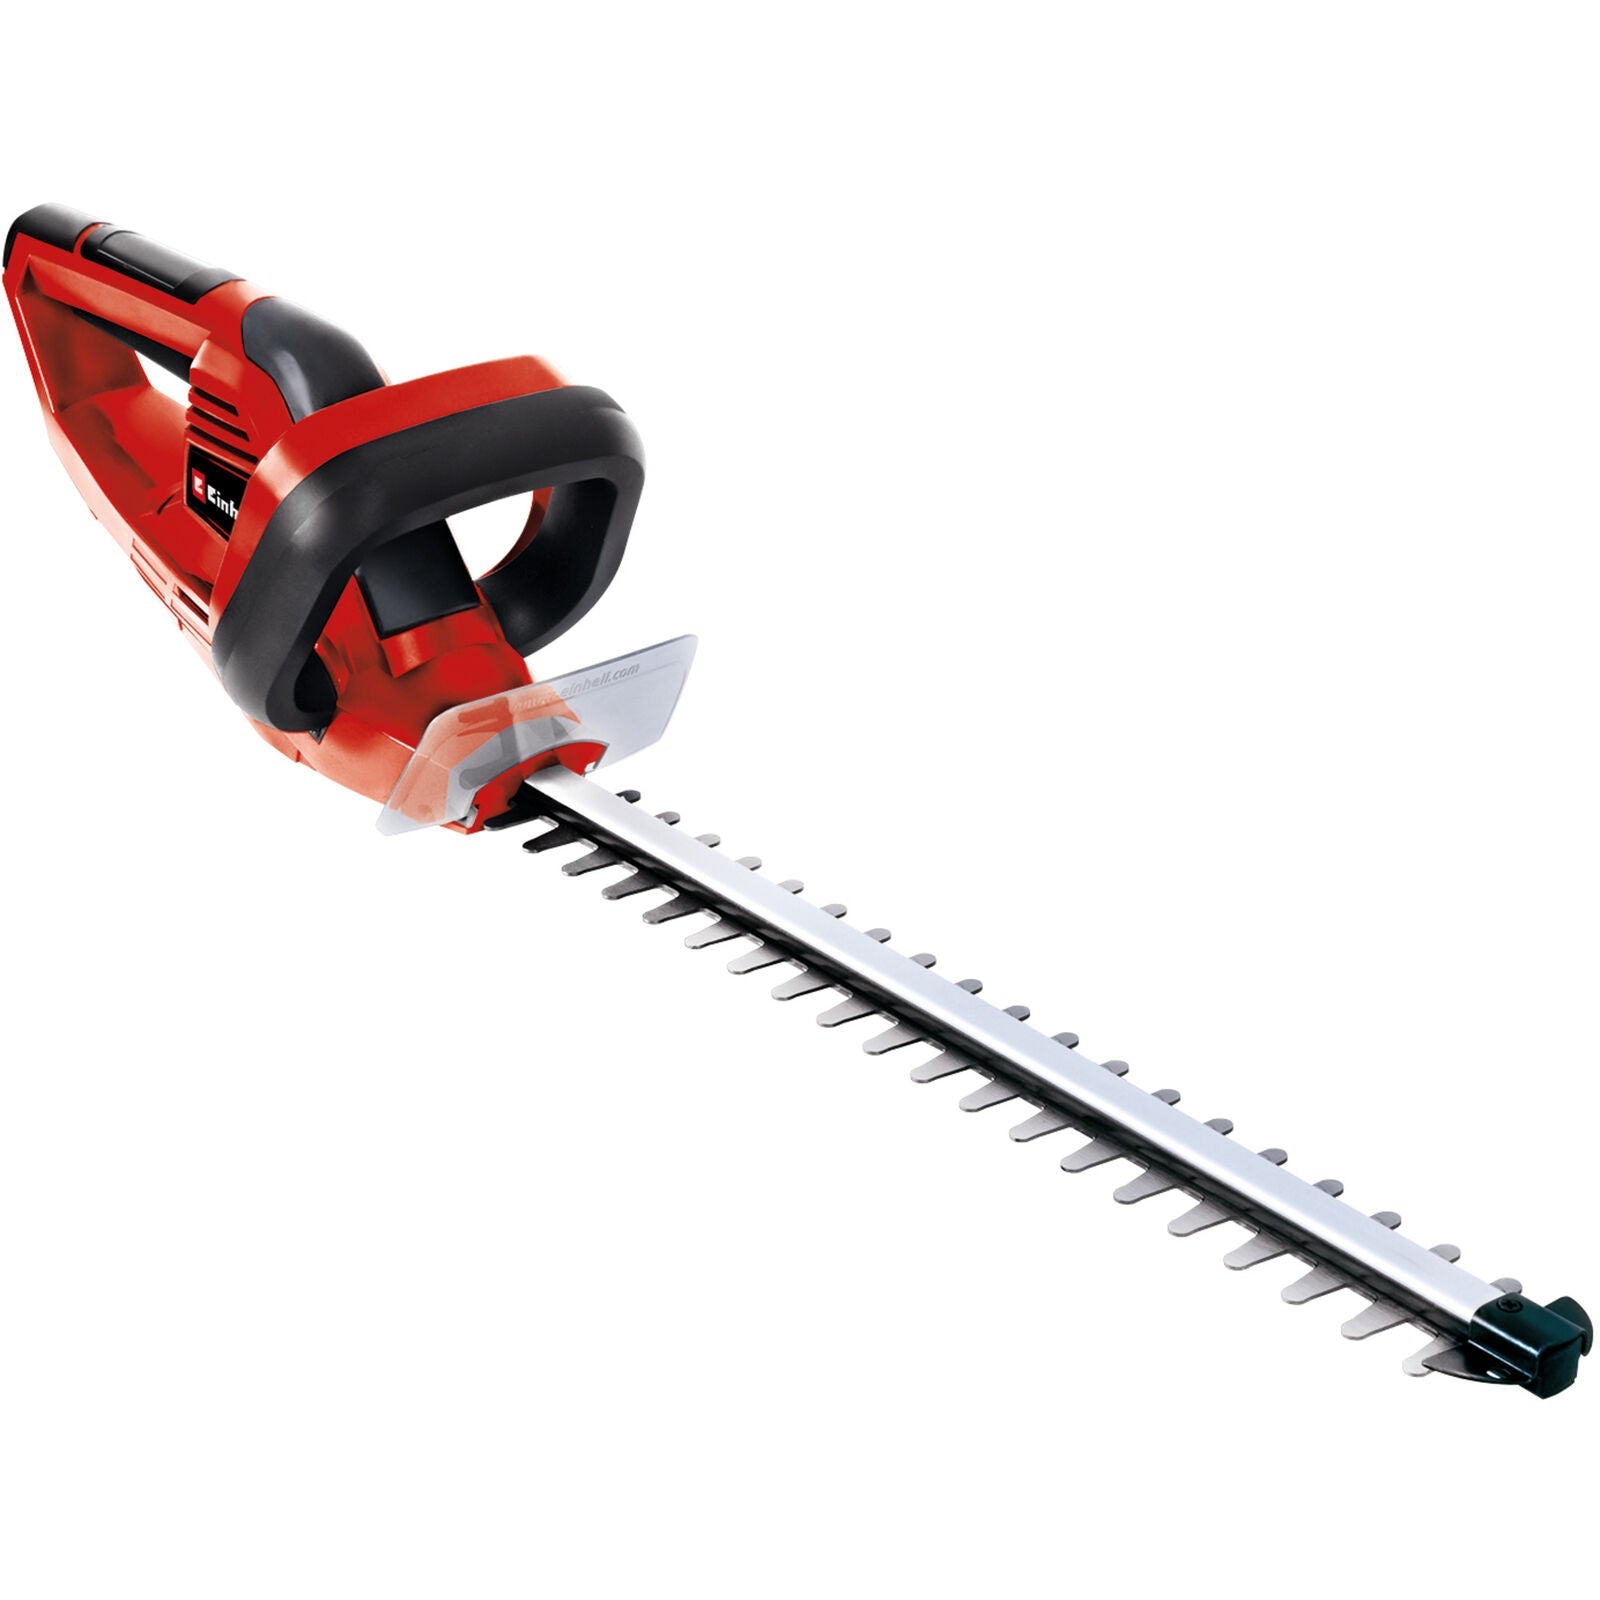 Einhell Electric Hedge Trimmer GC-EH 4550 Power Tool Services